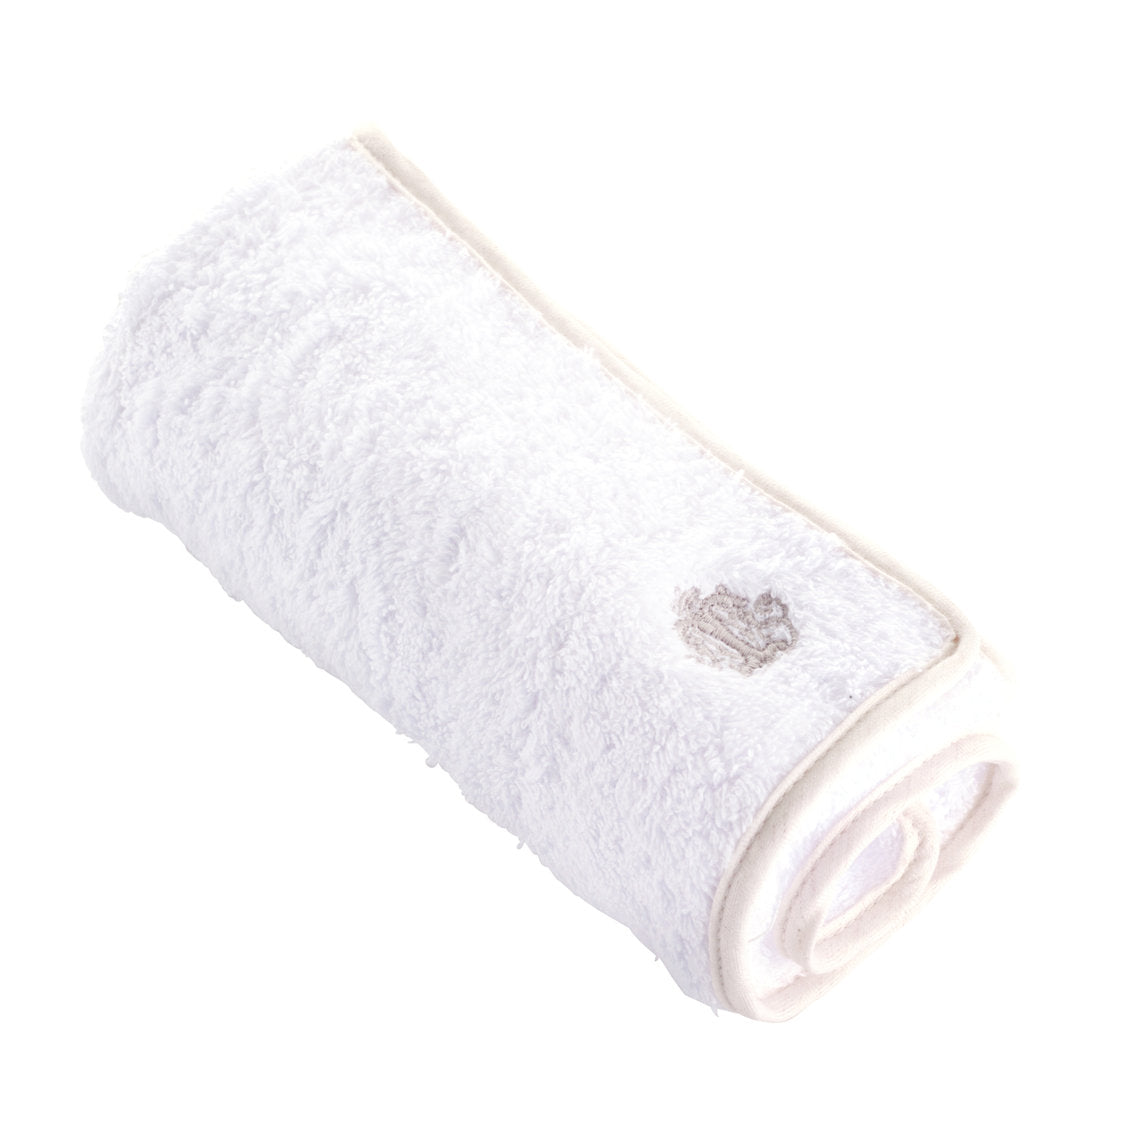 Theophile & Patachou Towel For Changing Mat - Sand